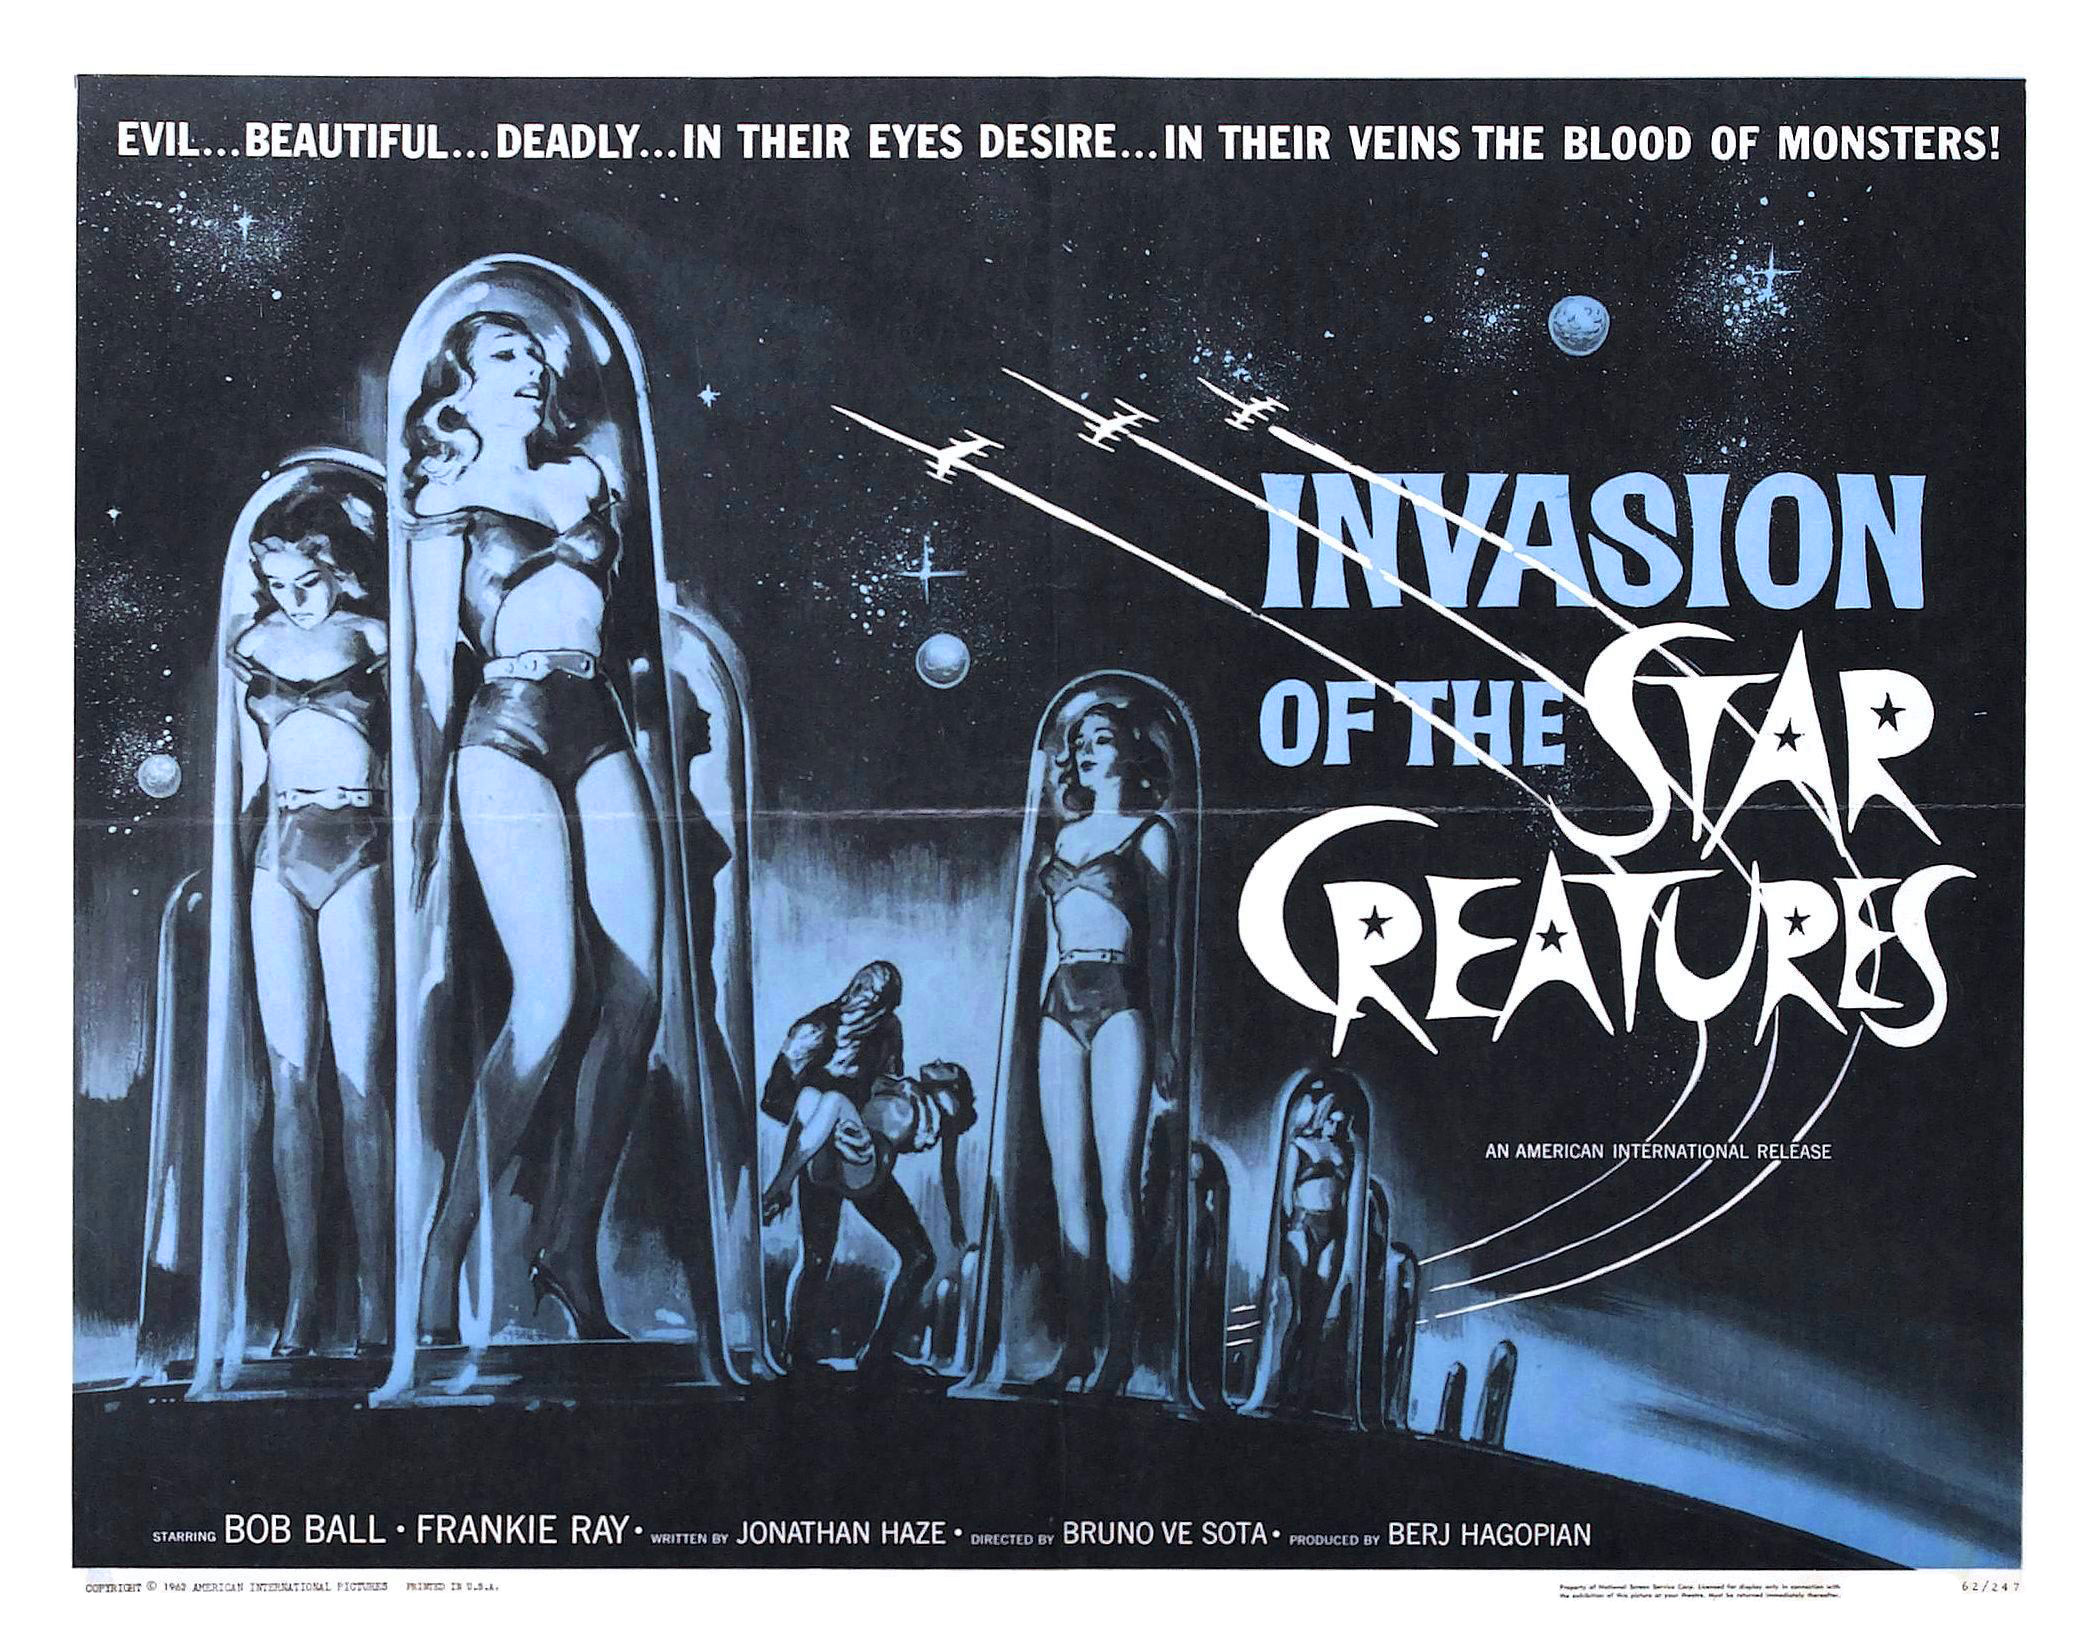 Invasion of the Star Creatures (1963)